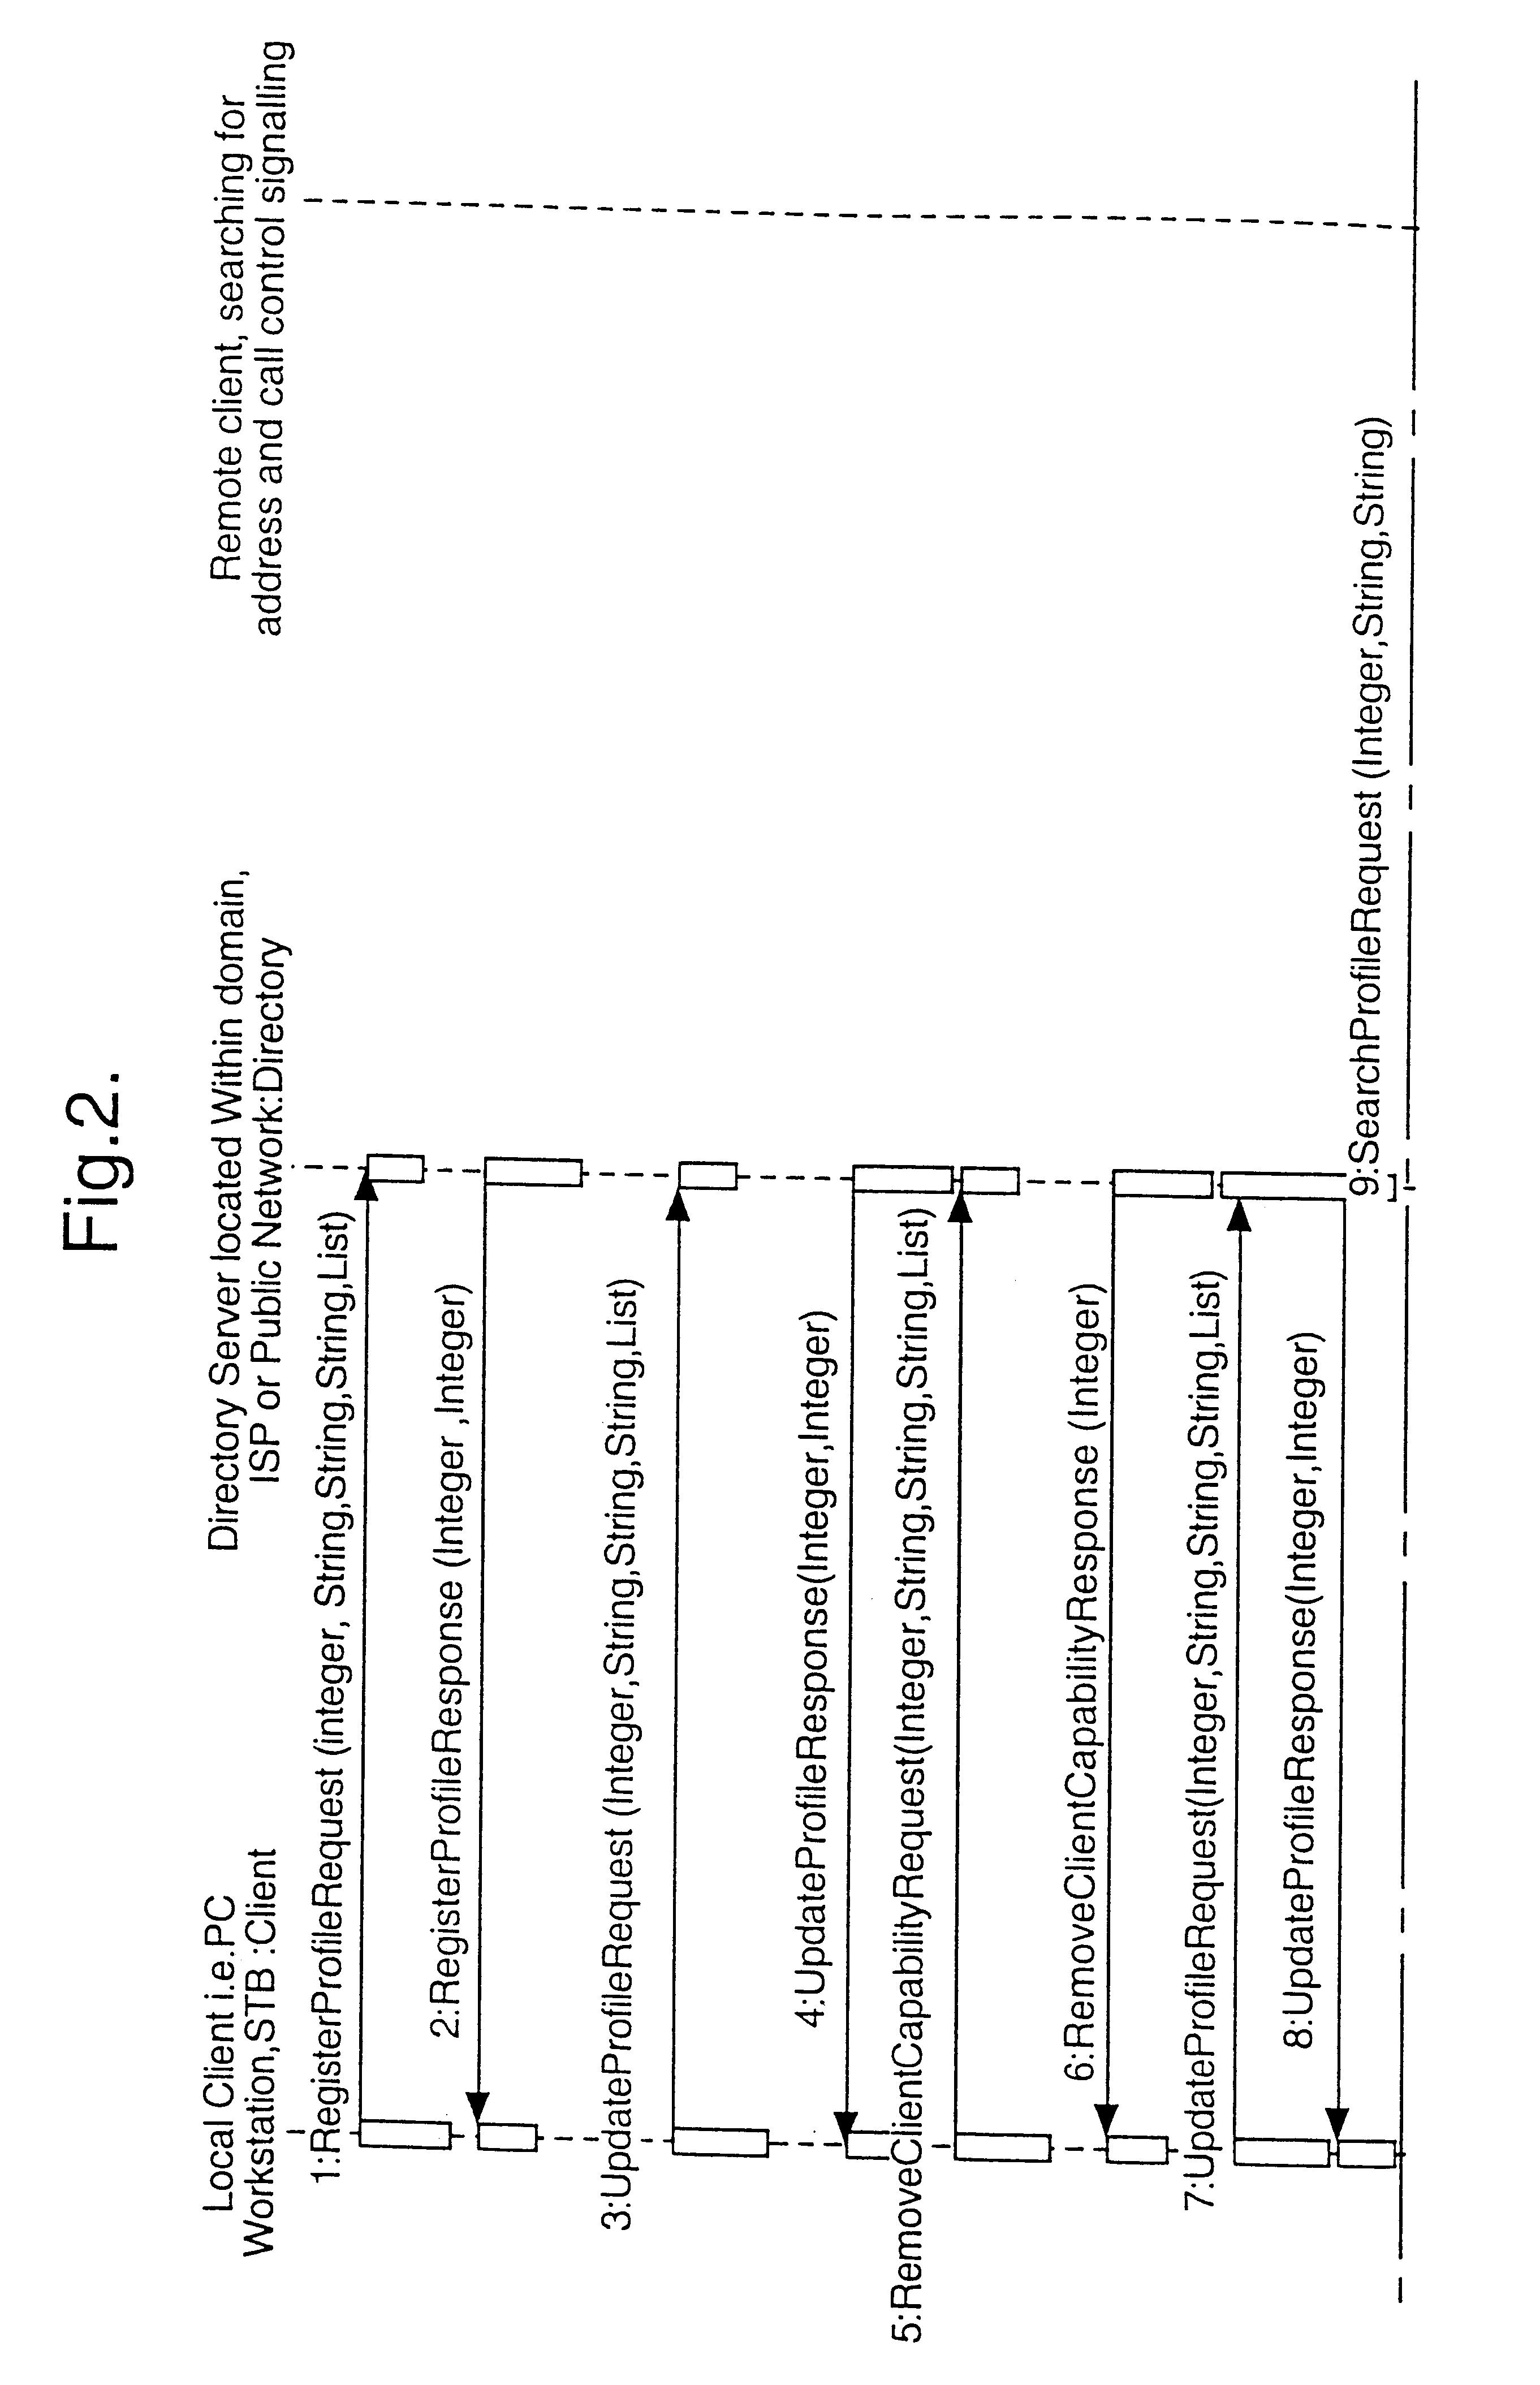 Communications network and method having accessible directory of user profile data